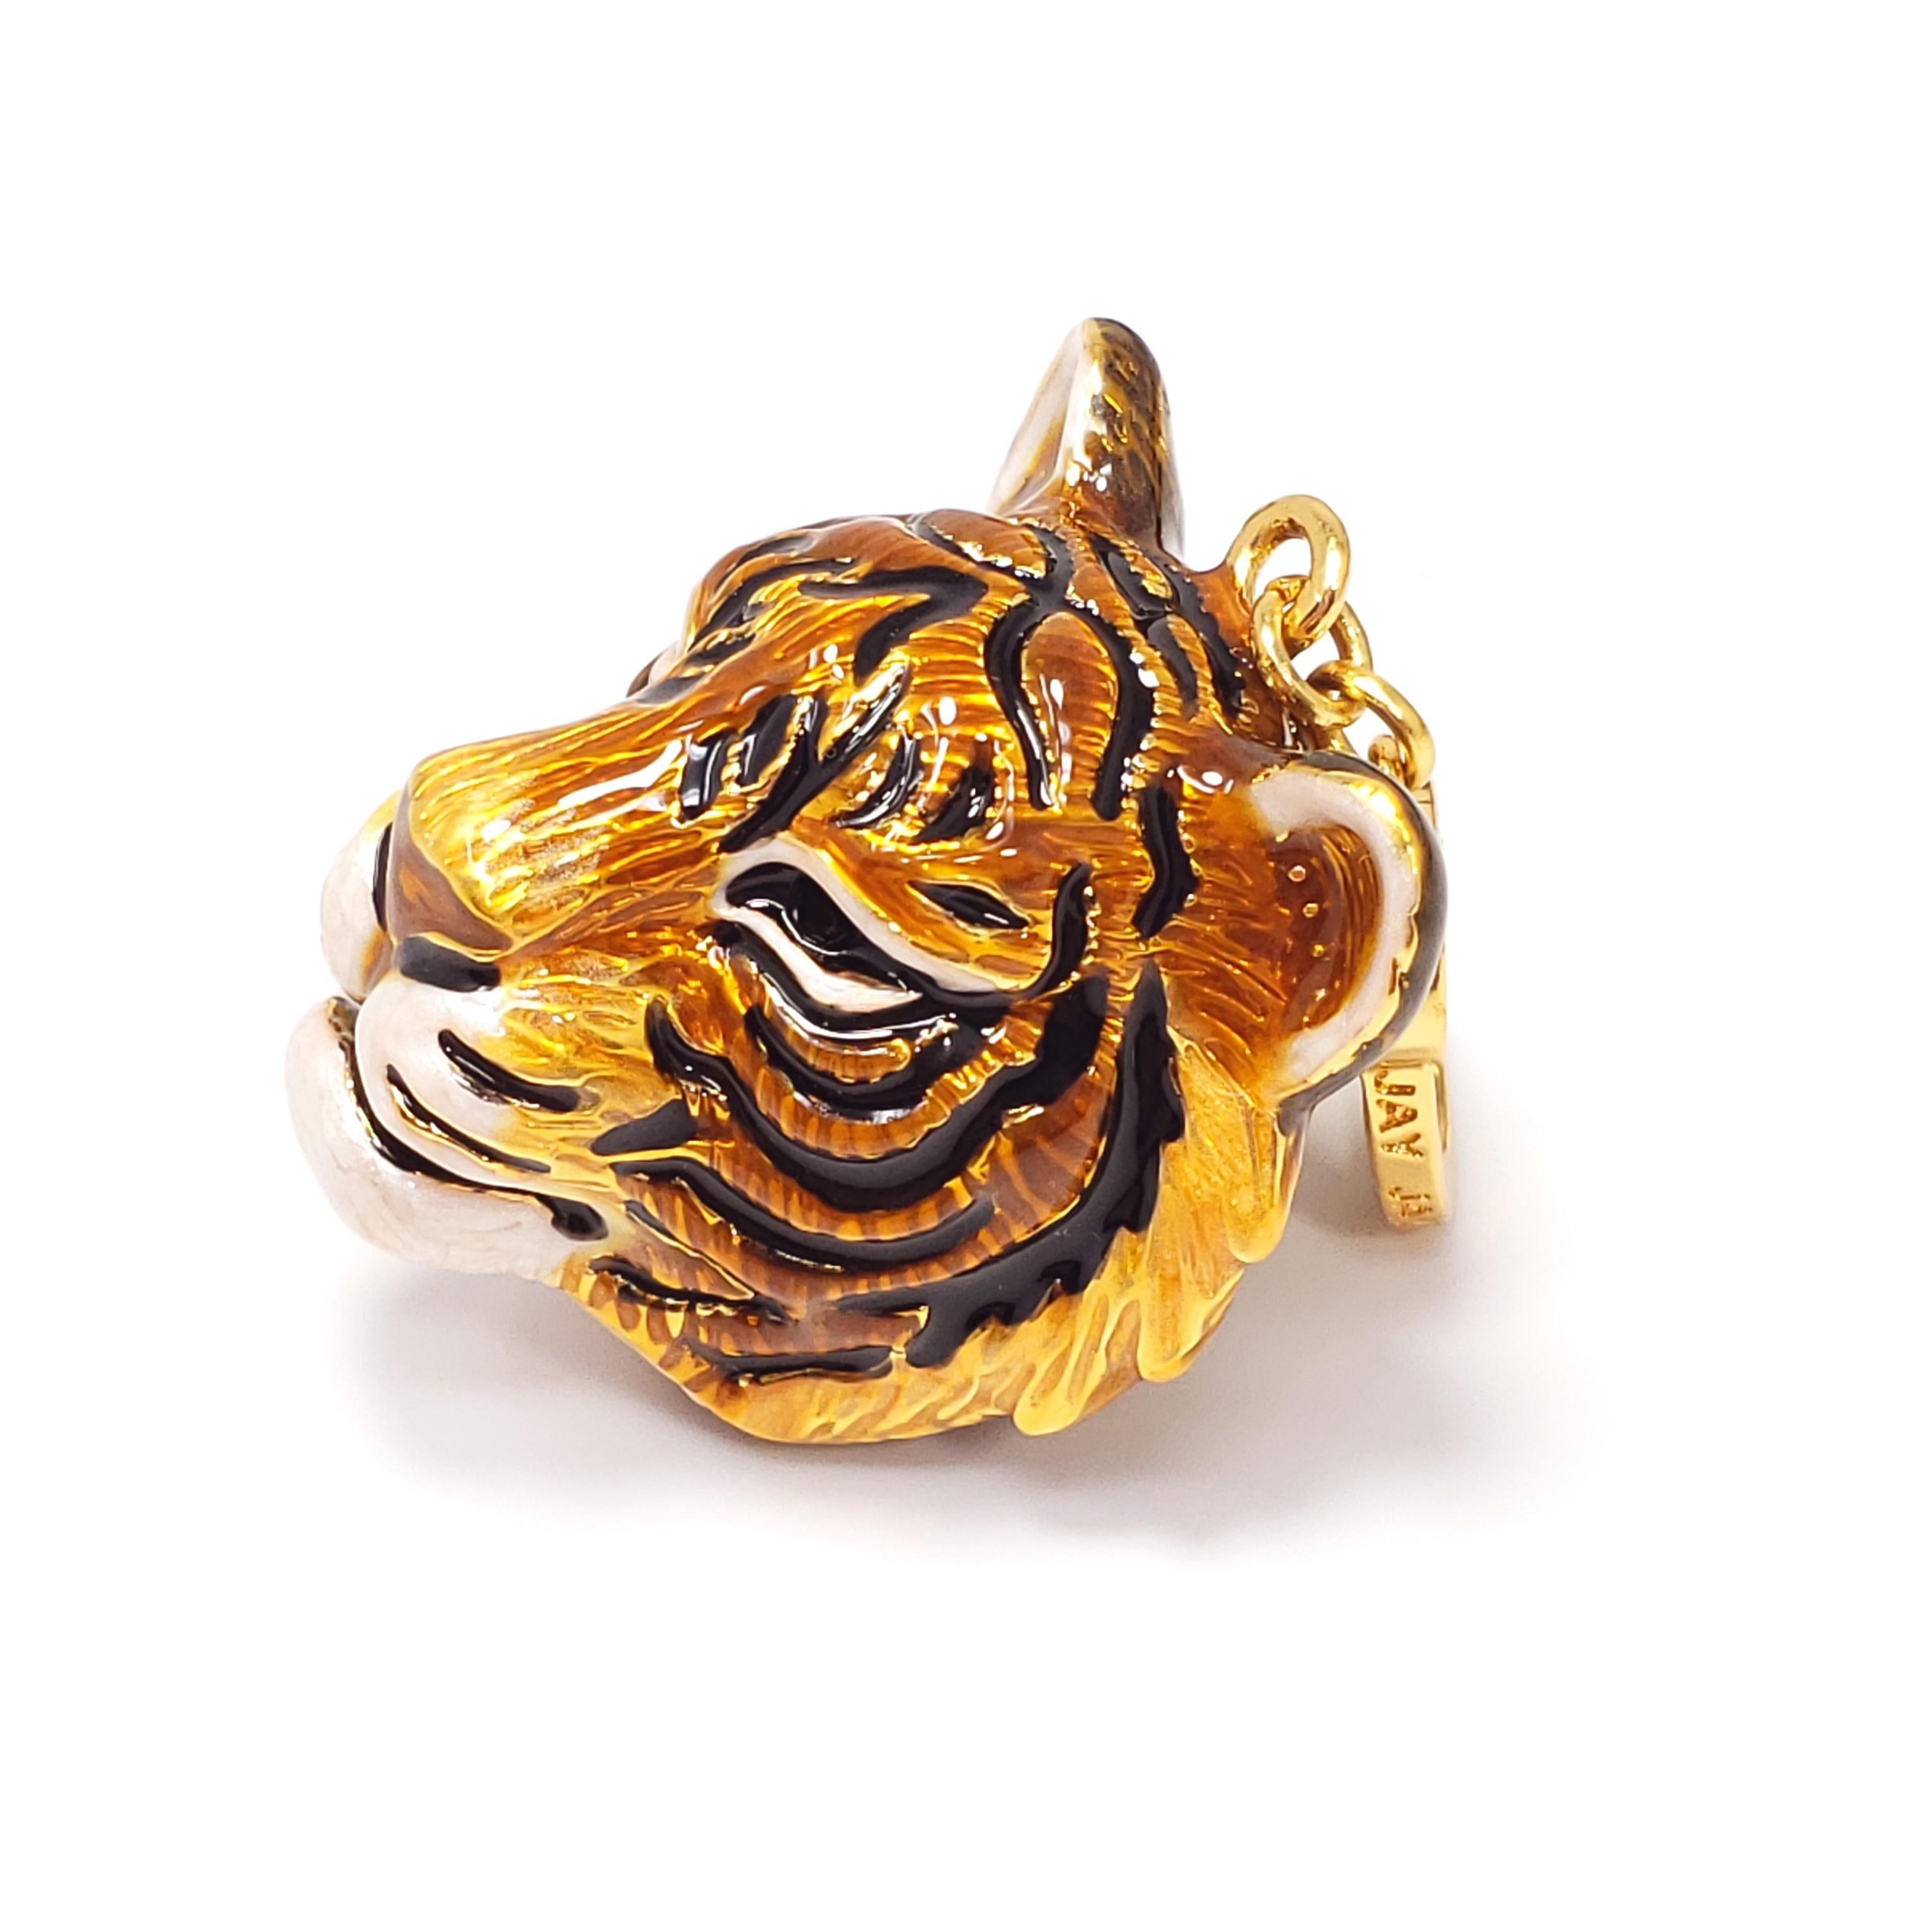 Hand-painted tiger head charm by Jay Strongwater. Shades of yellow, orange, and brown enamel, accented with black and white detailing. This charm can be worn on a bracelet, as a necklace pendant, or even on a keychain. Excellent